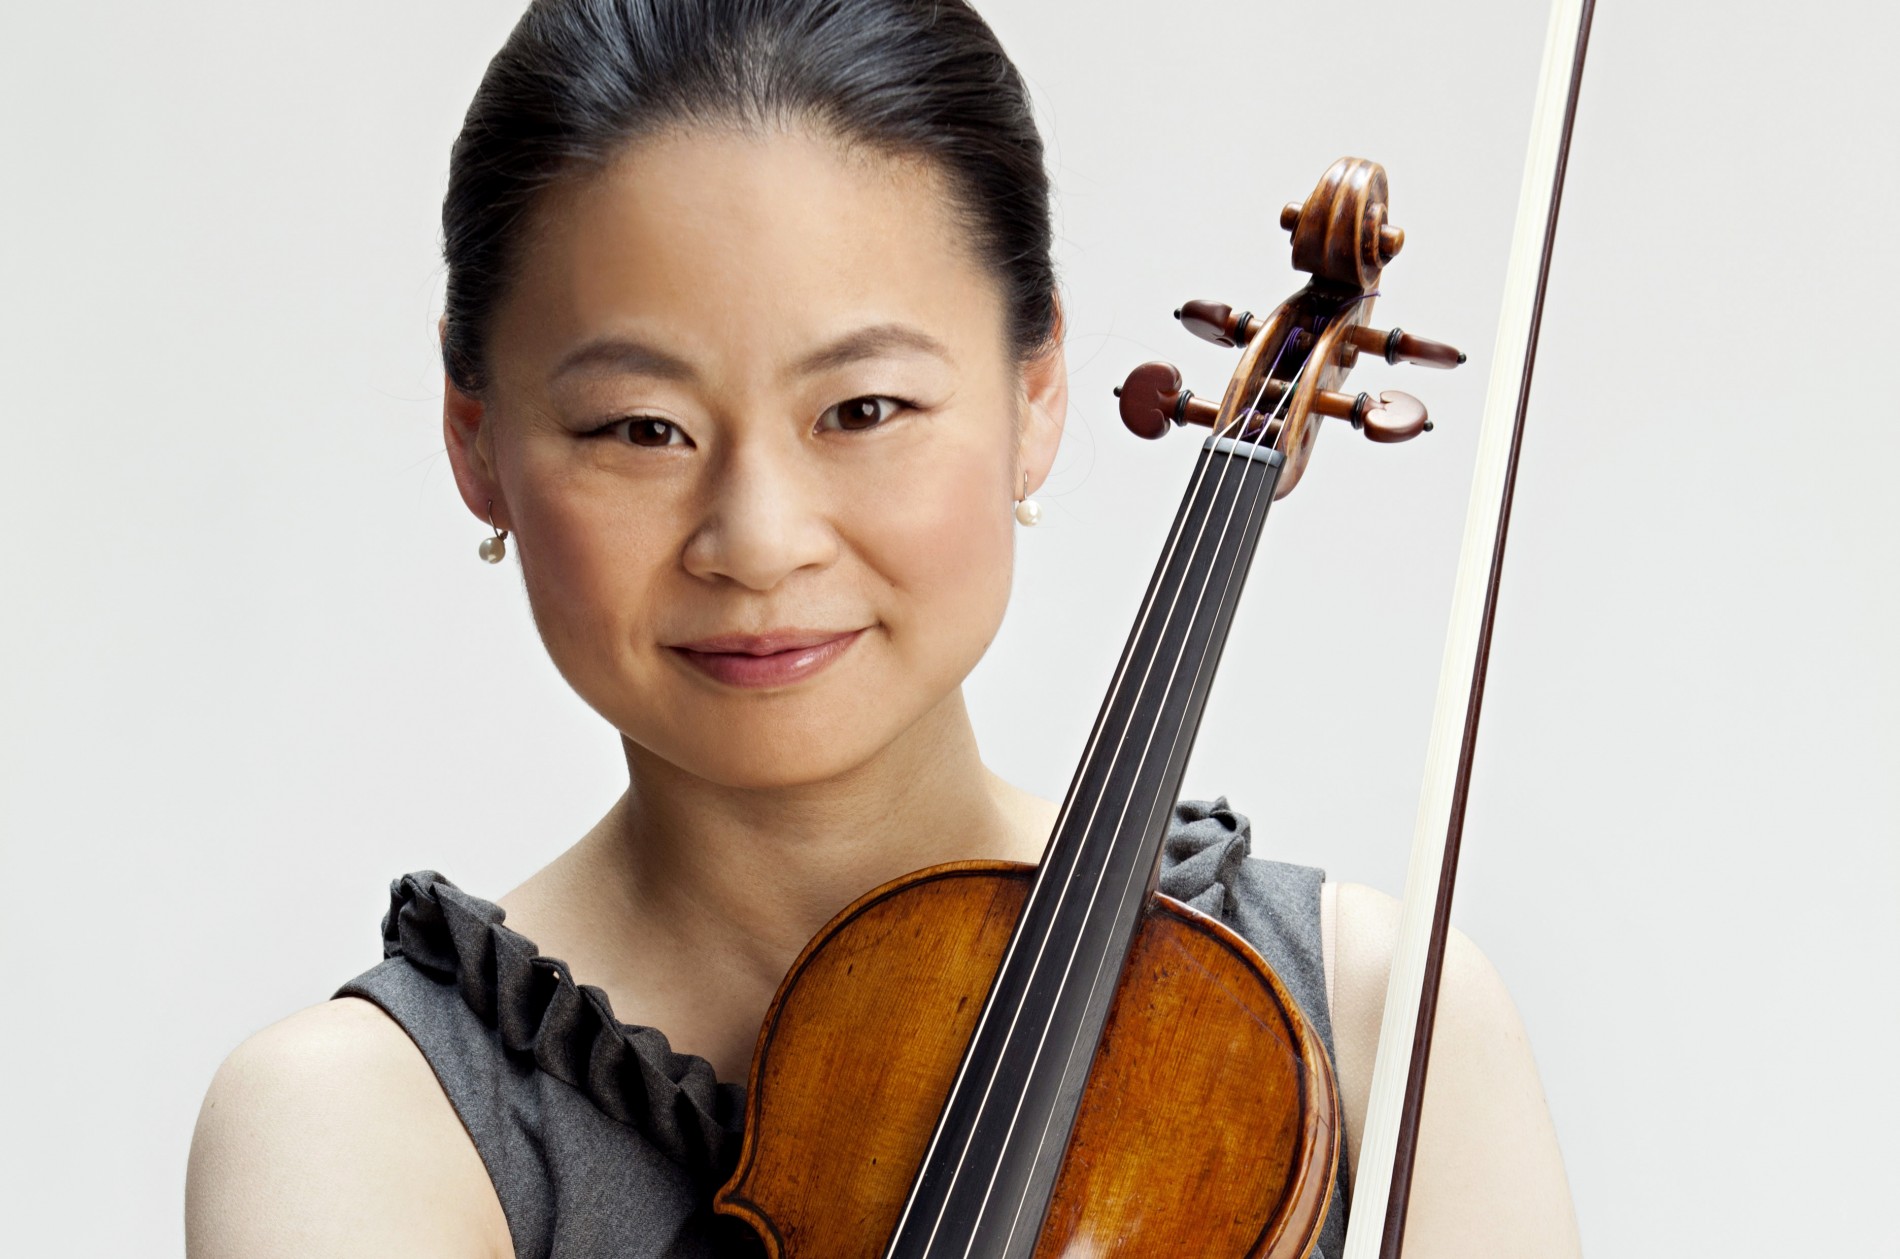 Midori, in gray, holds a violin and bow